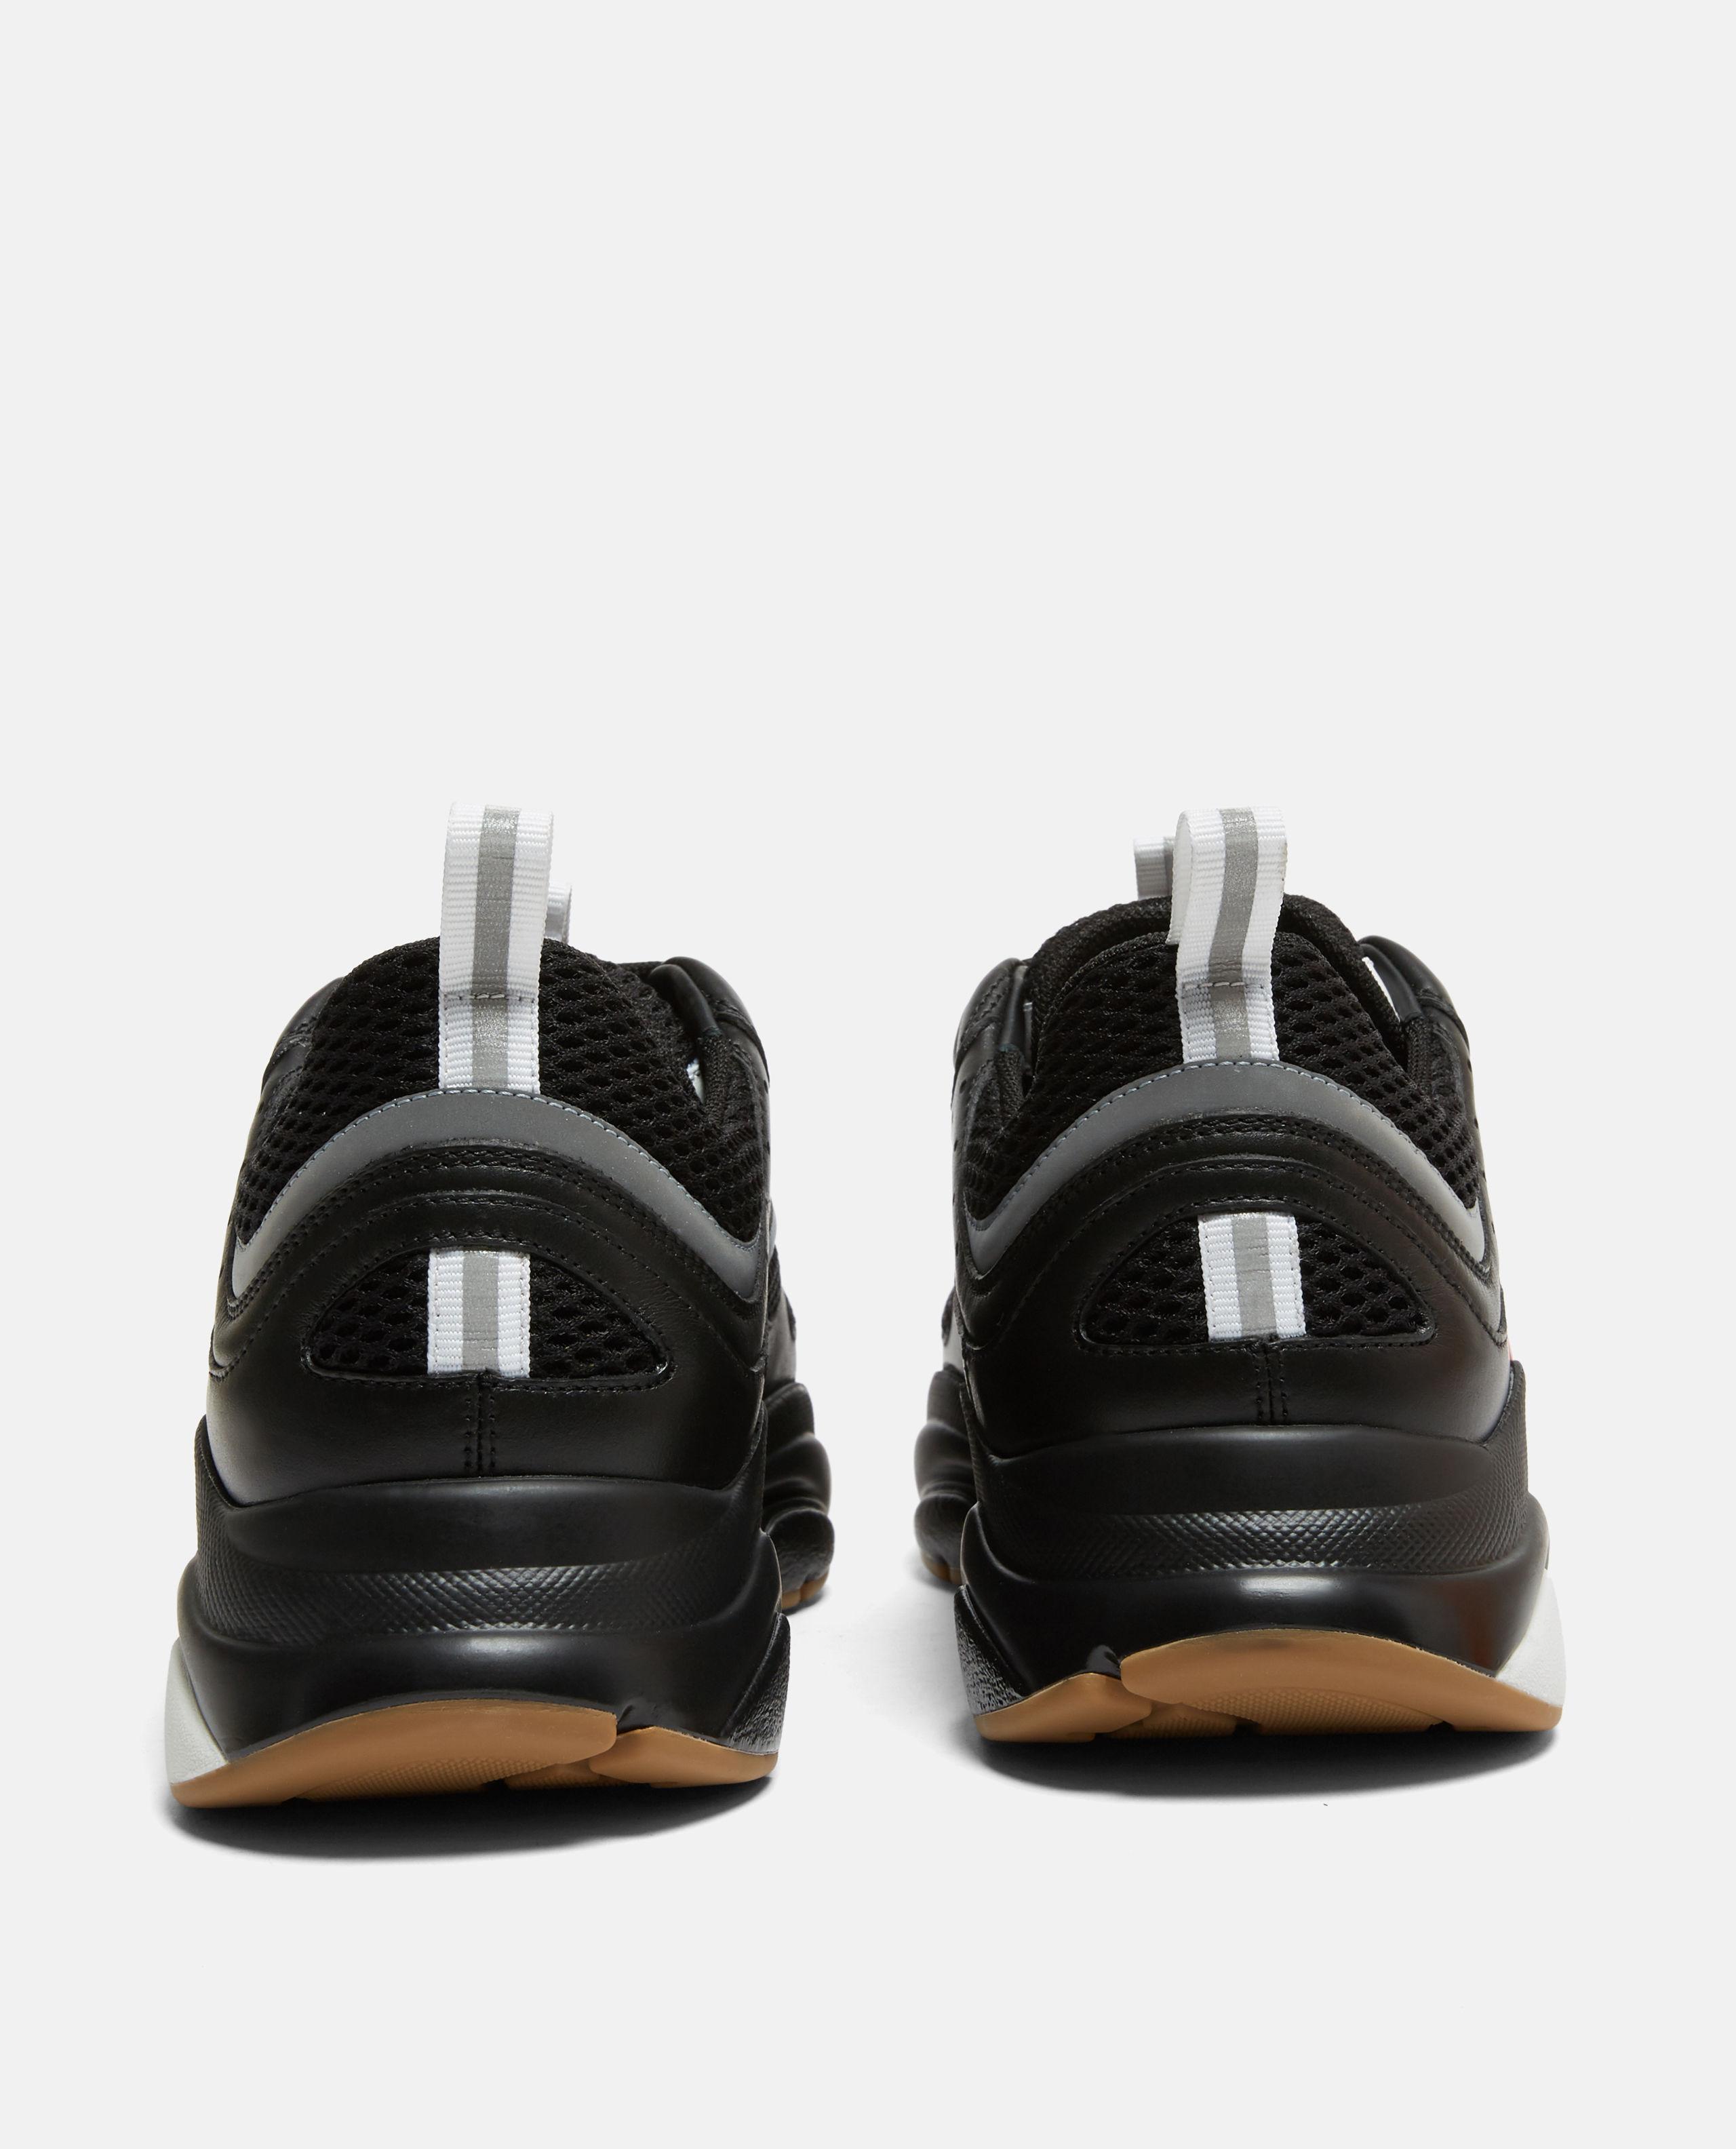 Dior Homme Leather B22 Sneakers in Black for Men | Lyst